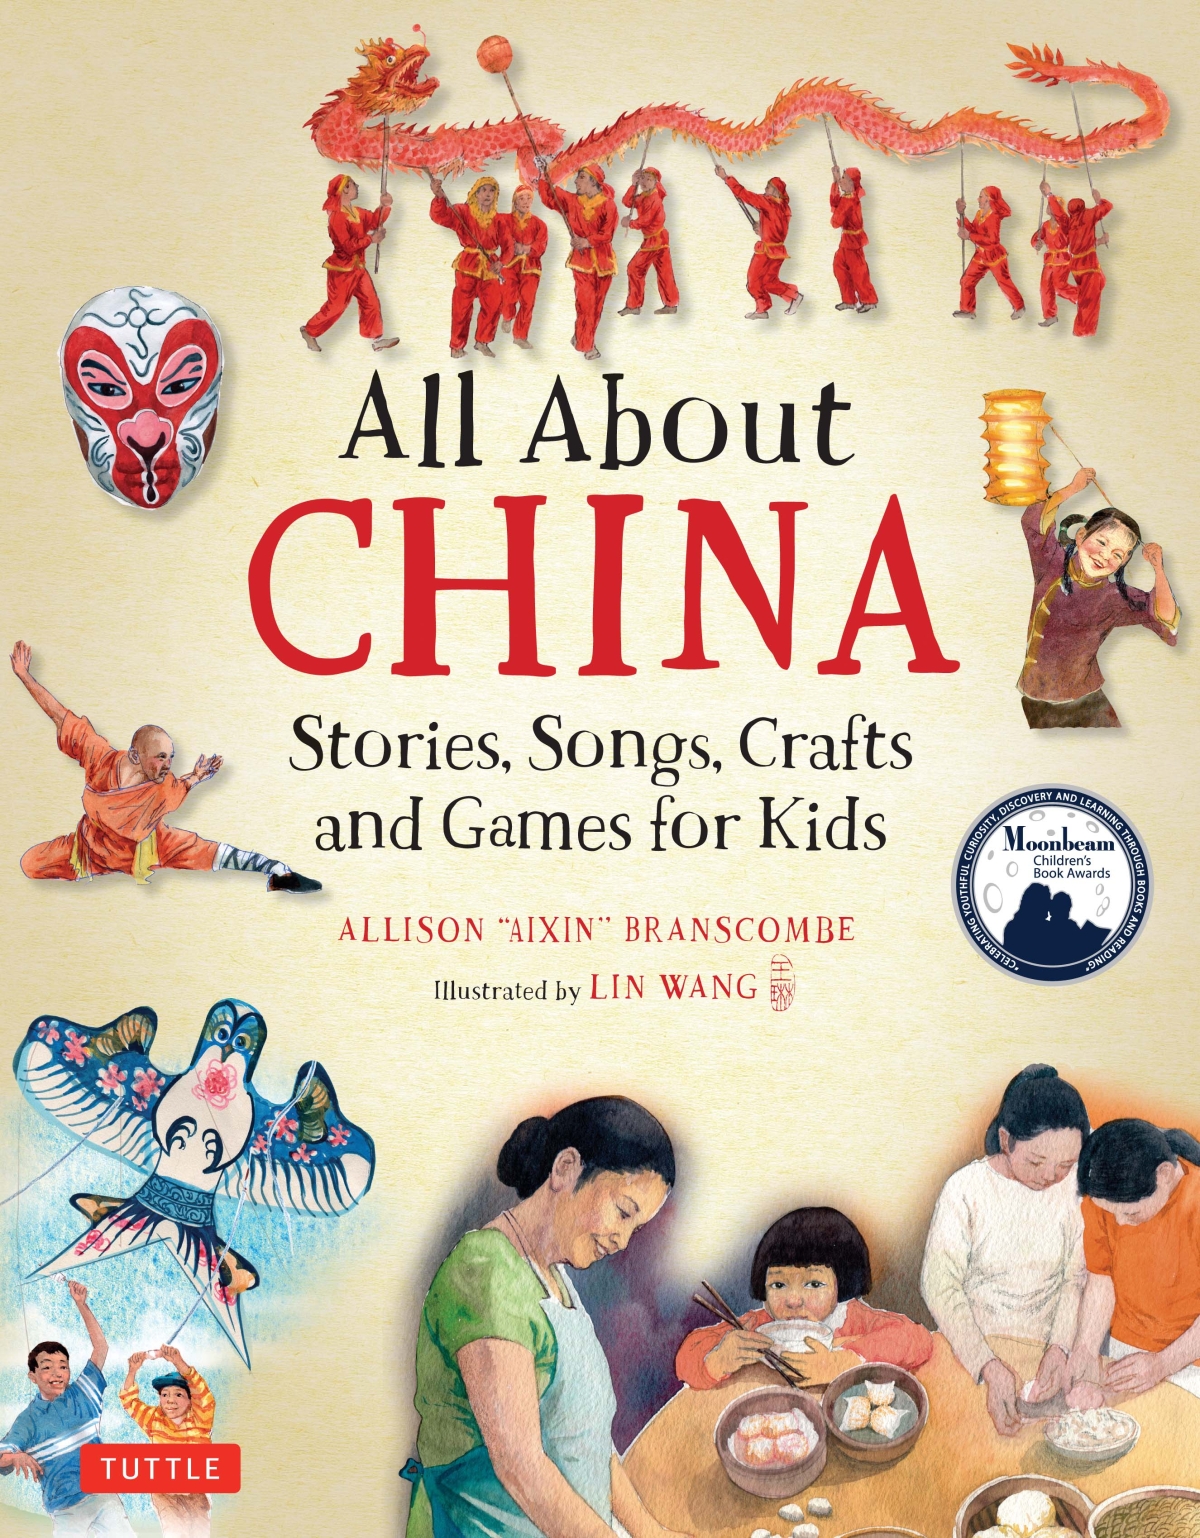 Story time with Allison Branscombe - All About China